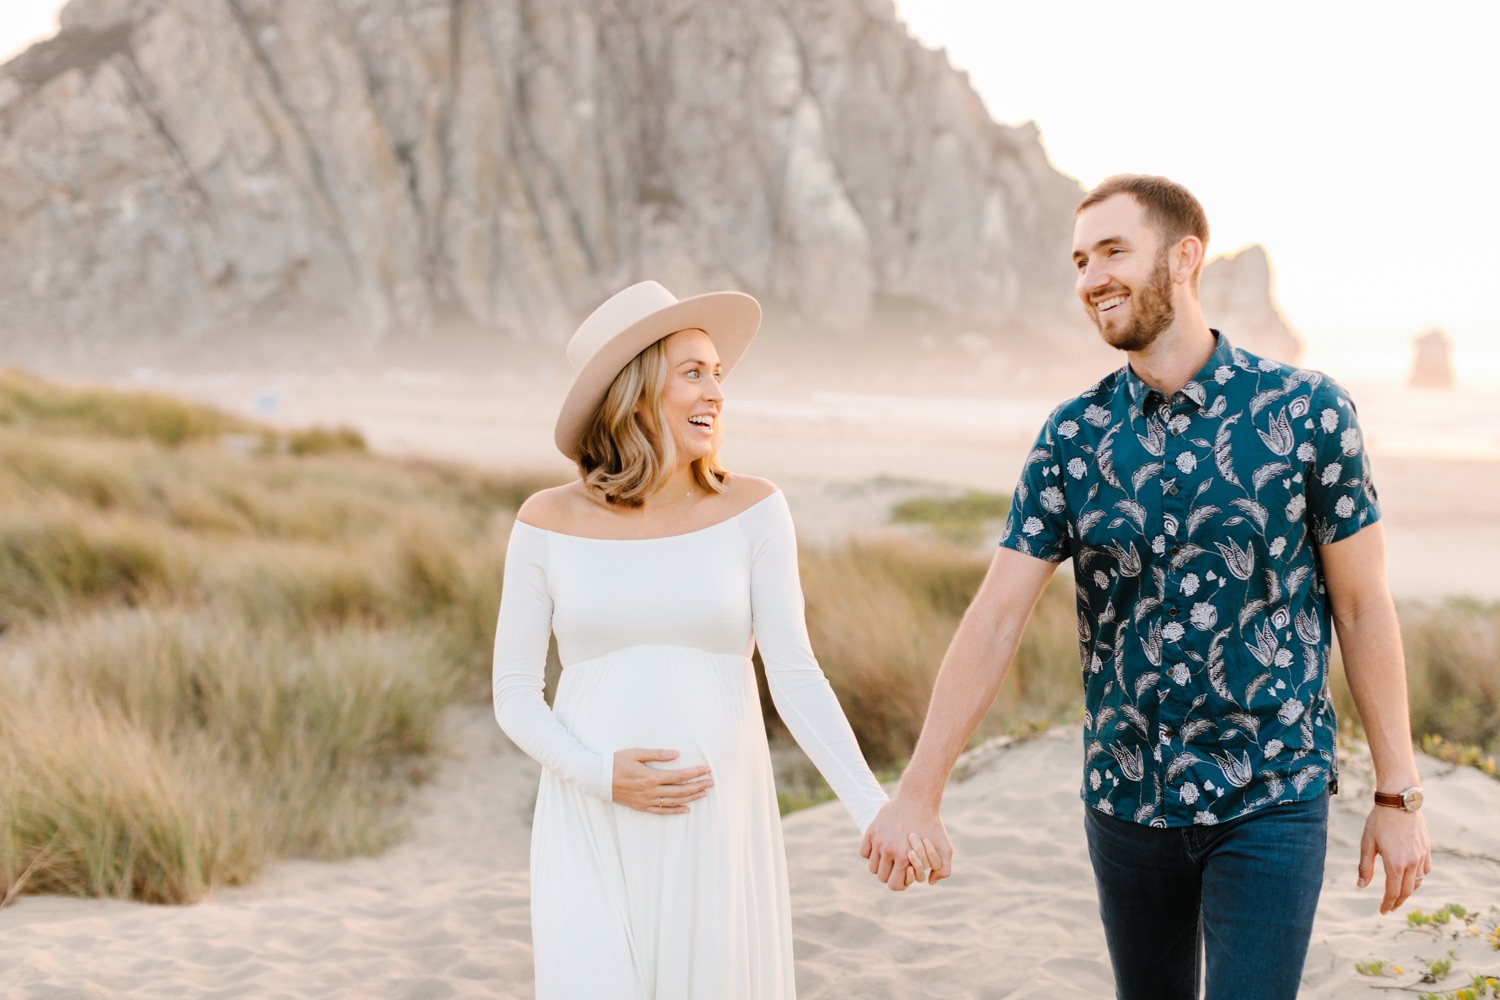 couple walking hand in hand on the sand dunes for their beach maternity session at Morro Bay rock, california. Woman is wearing a white dress and light colored hat, the man is wearing a blue and white patterned button up shirt and they are smiling at eachother during session photographed by newborn photographer, Tayler Enerle